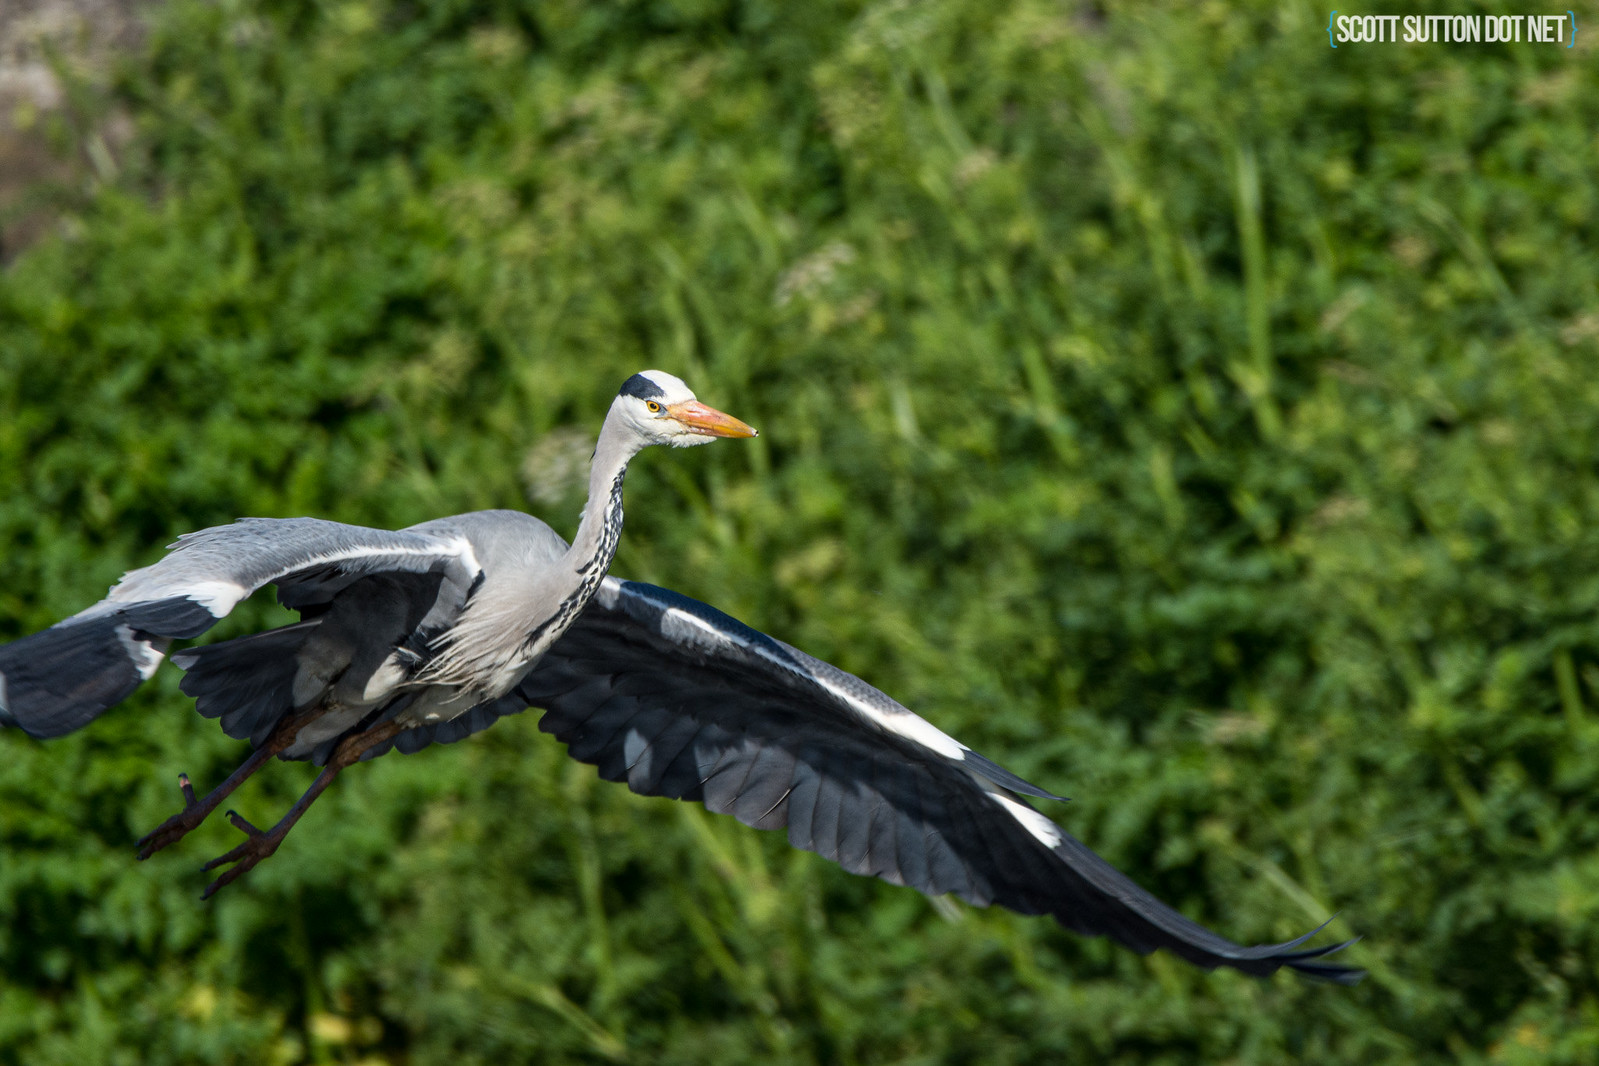 One of the local Herons